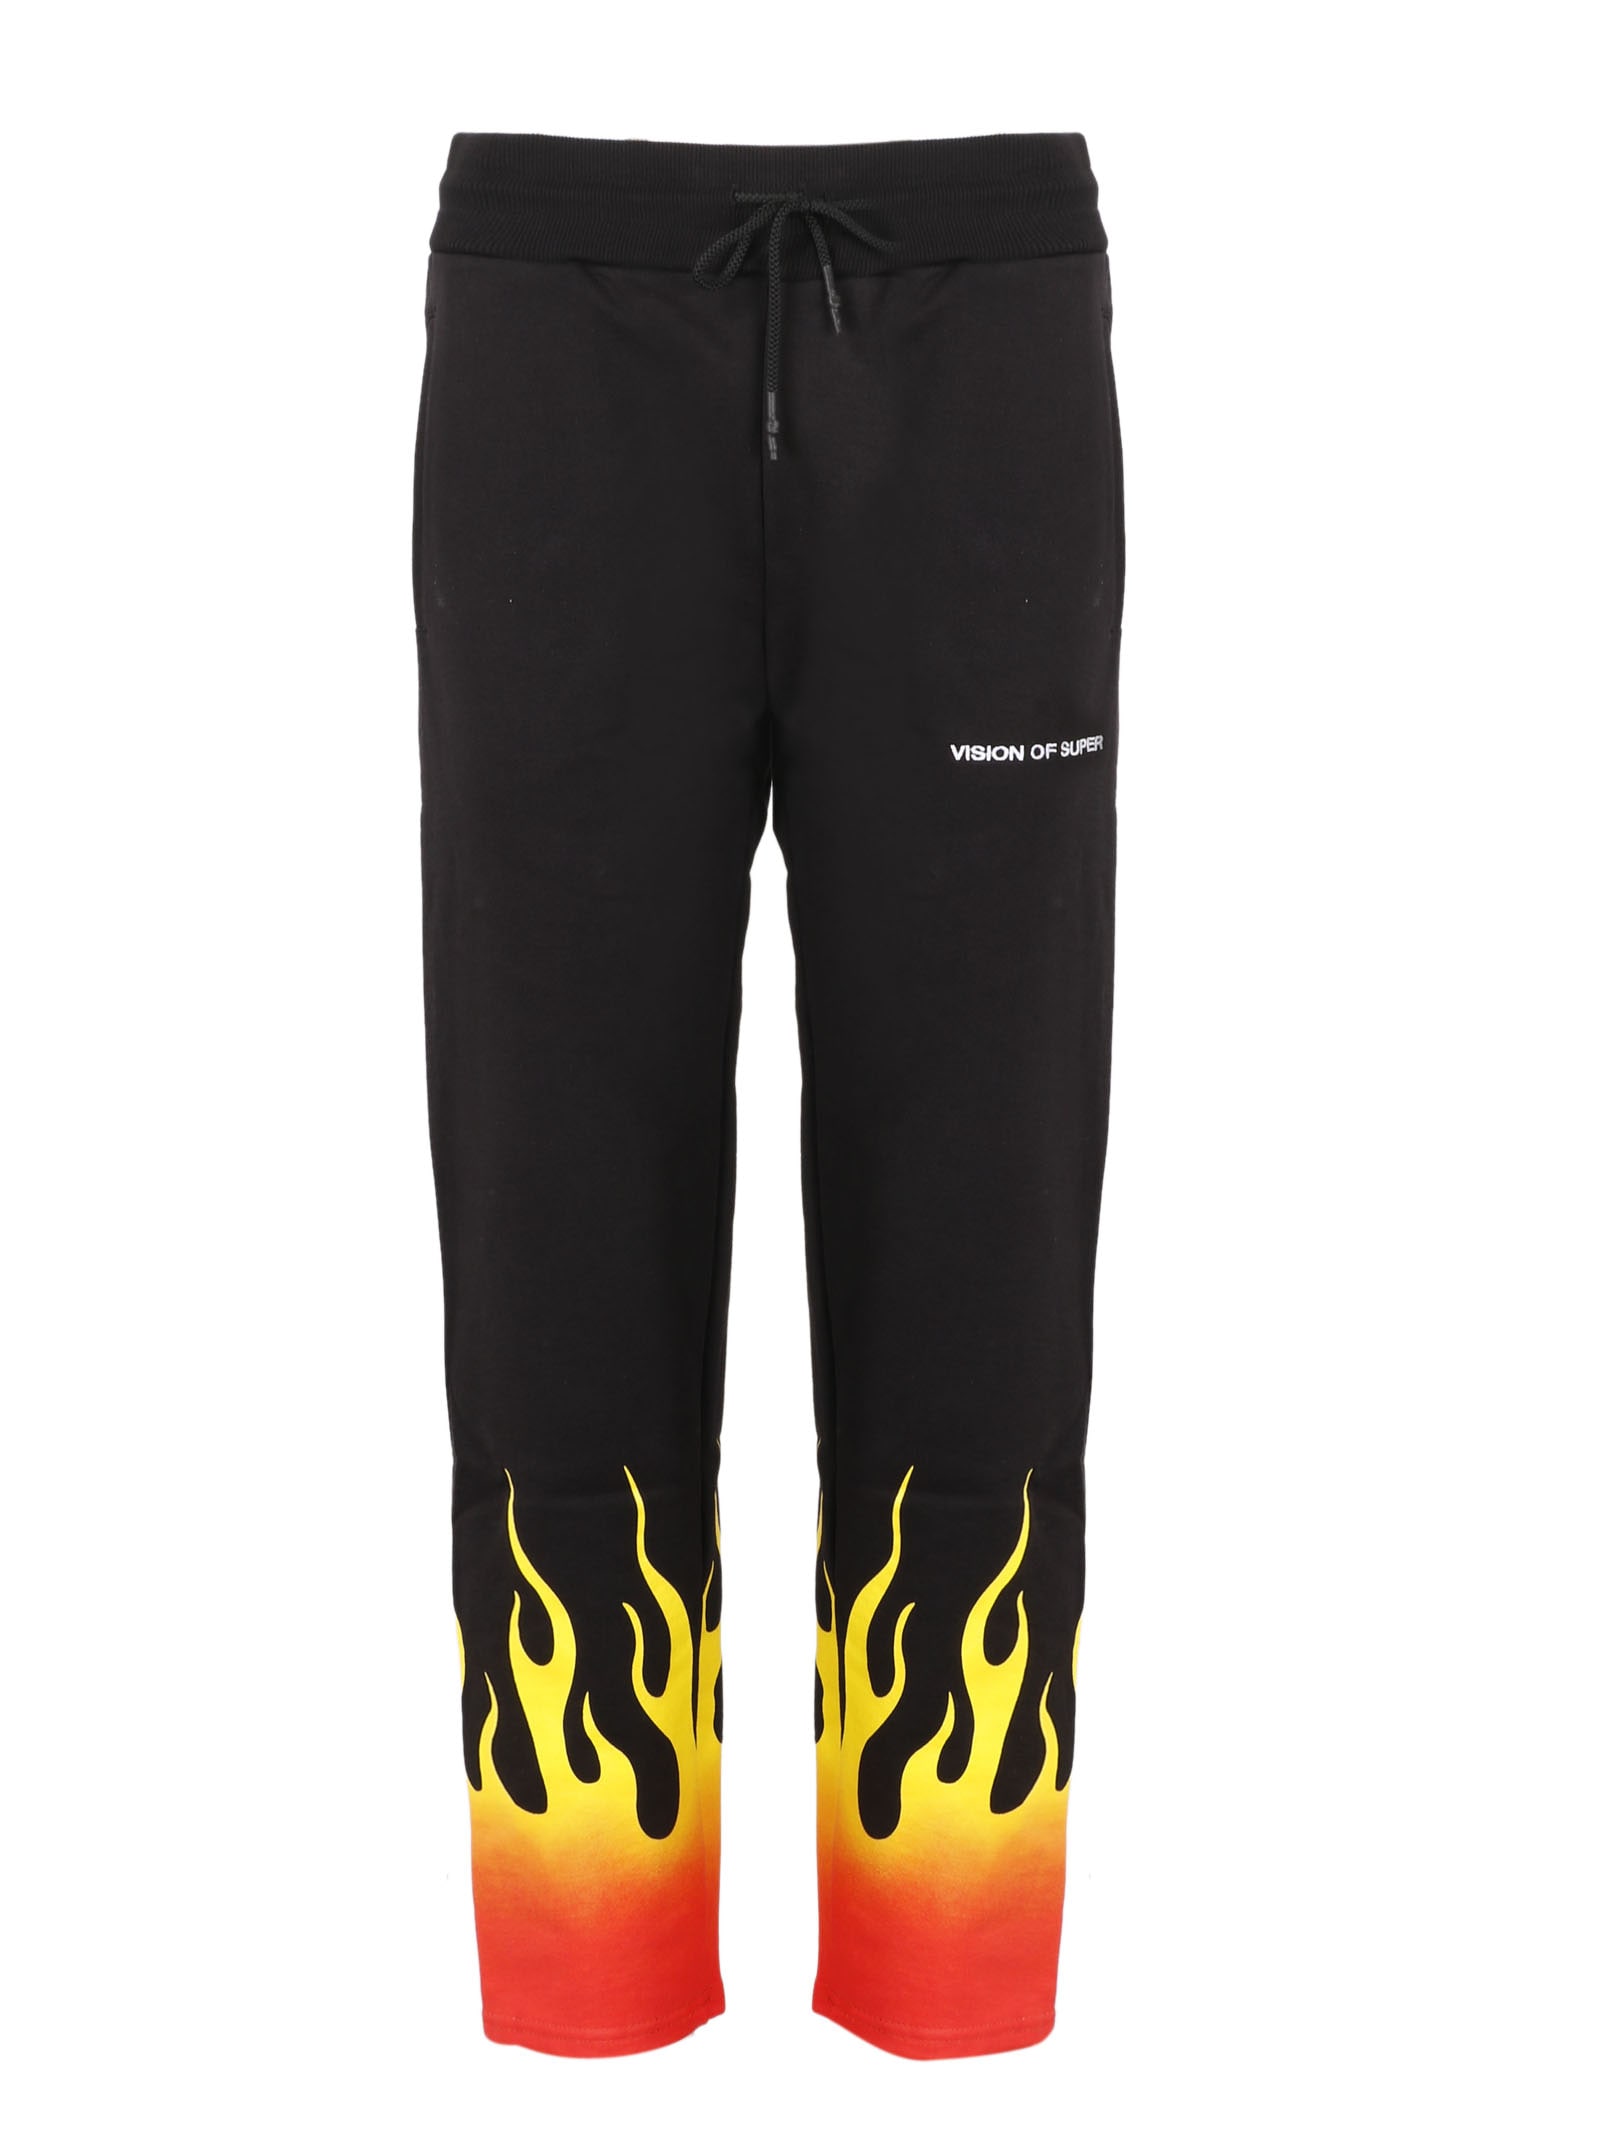 Vision of Super Nuanced Flame Sweat Pants